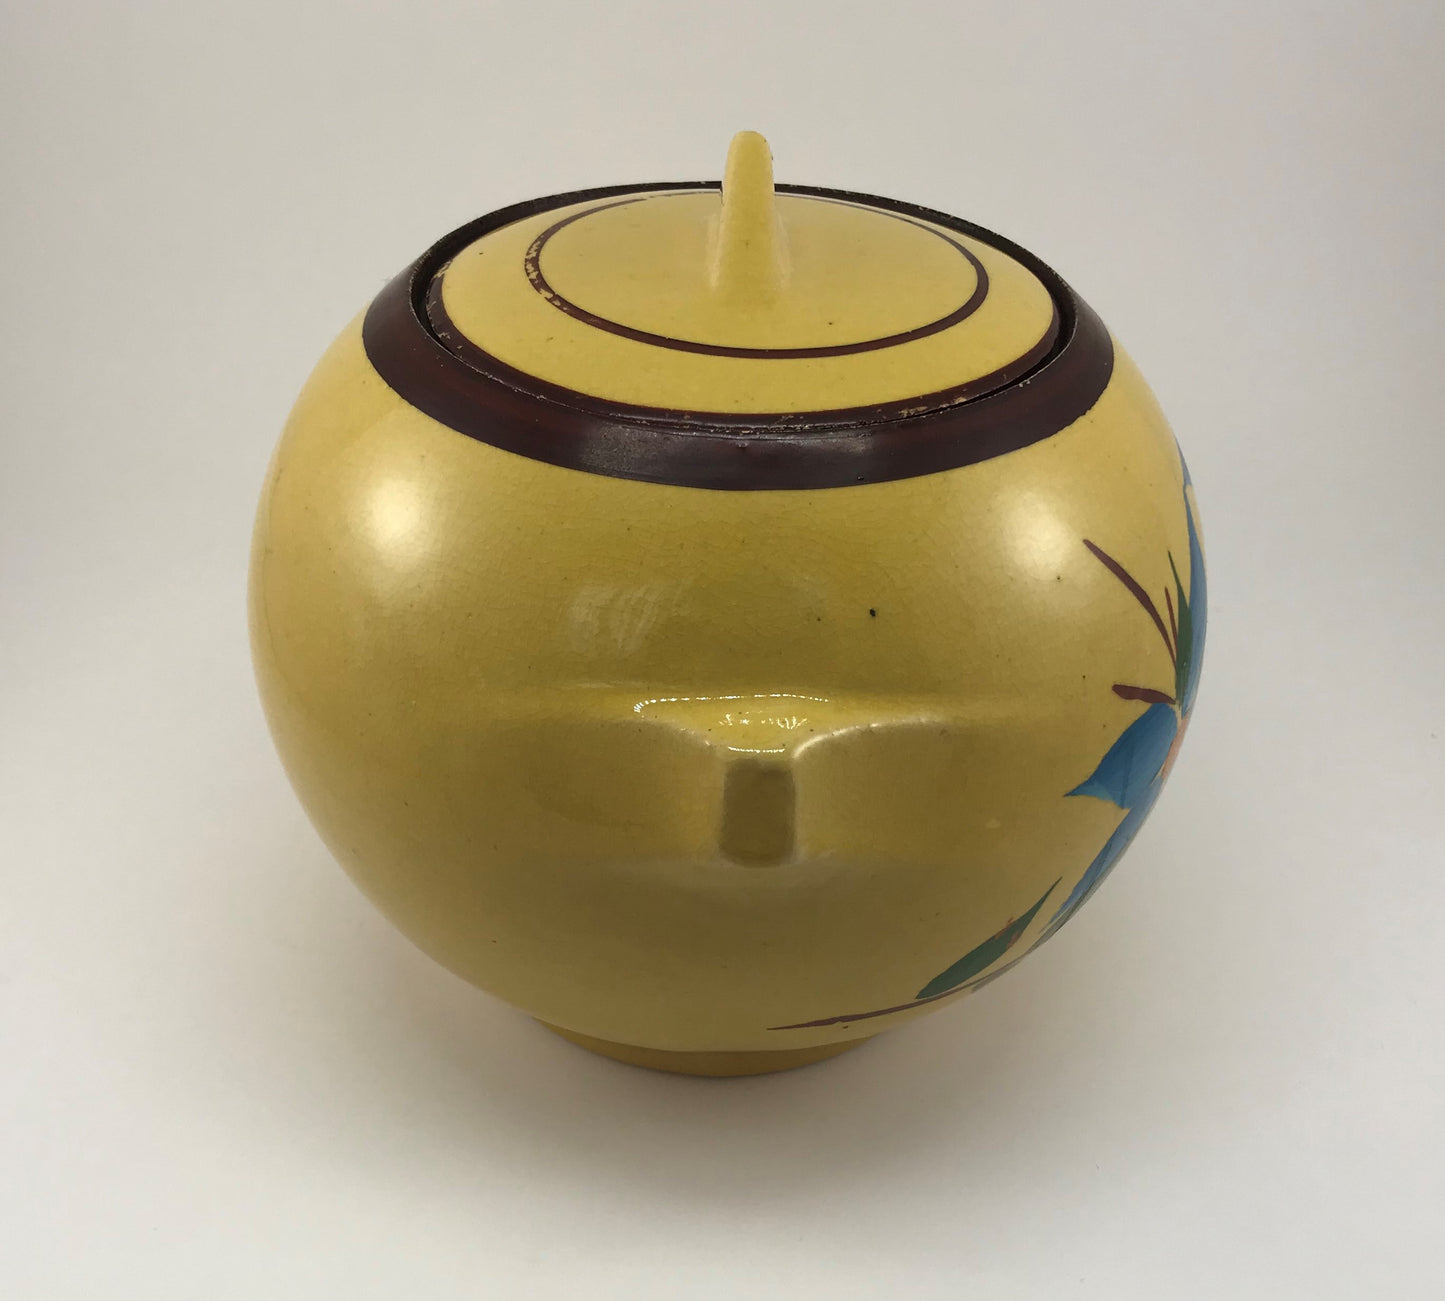 McCoy Cookie Jar, Yellow with Hand-painted Blue Flowers, c. 1939